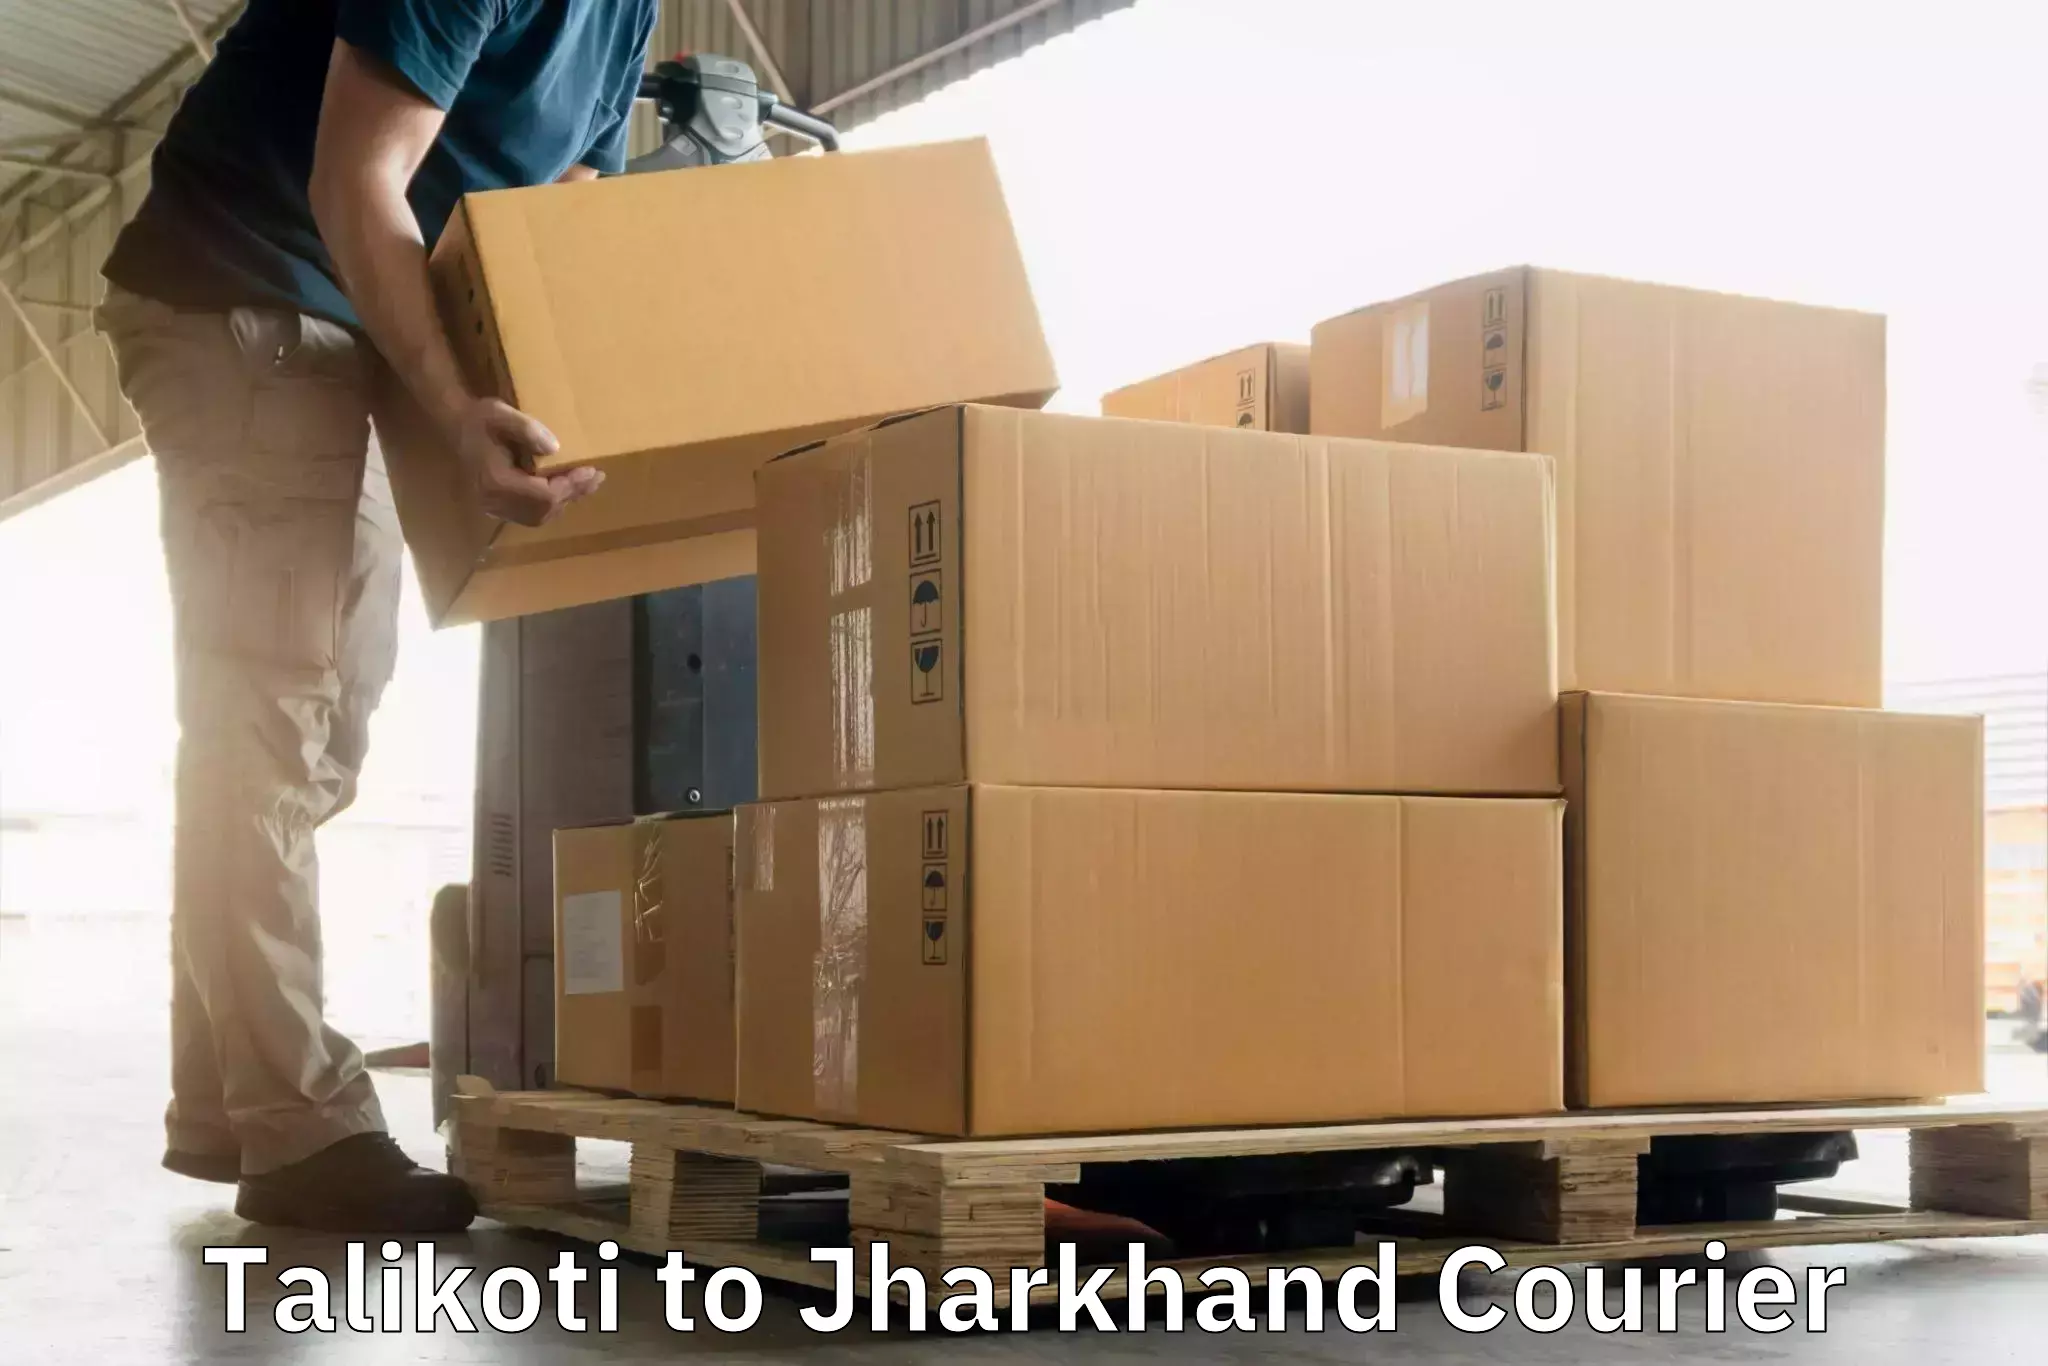 Parcel service for businesses Talikoti to Dhanbad